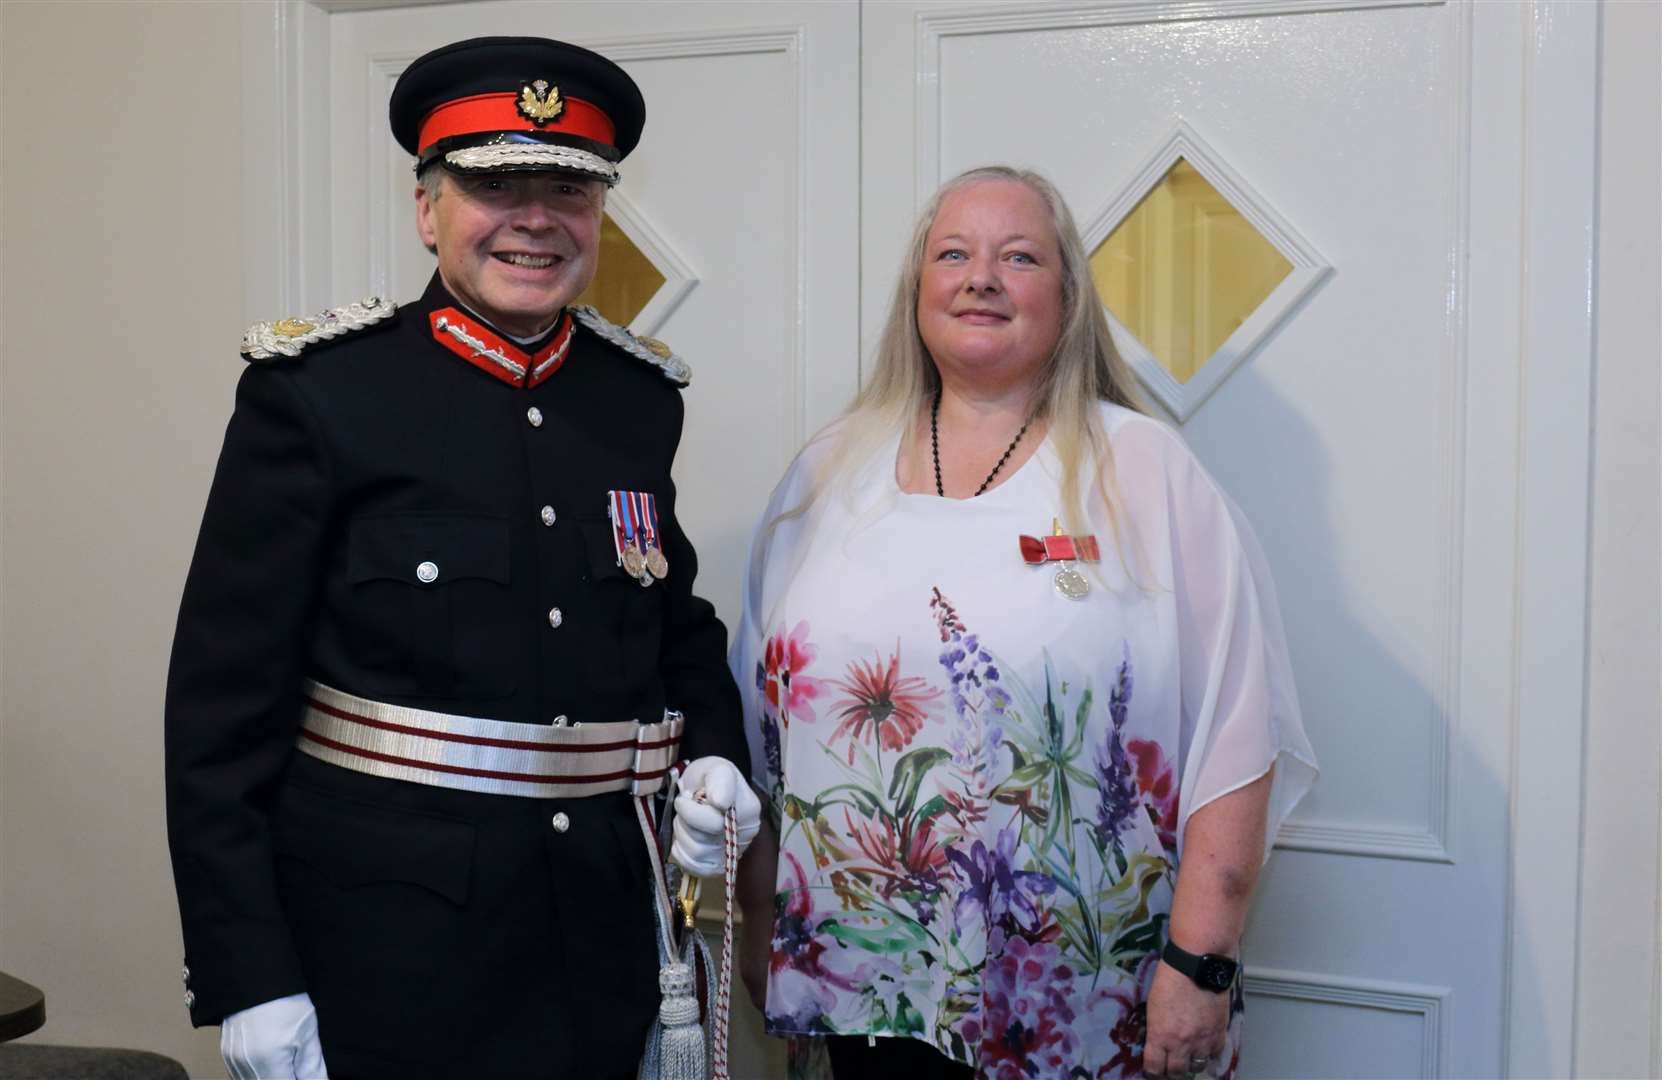 The British Empire Medal was presented to Morag Lightning by Lord Lieutenant of Aberdeenshire, Sandy Manson.